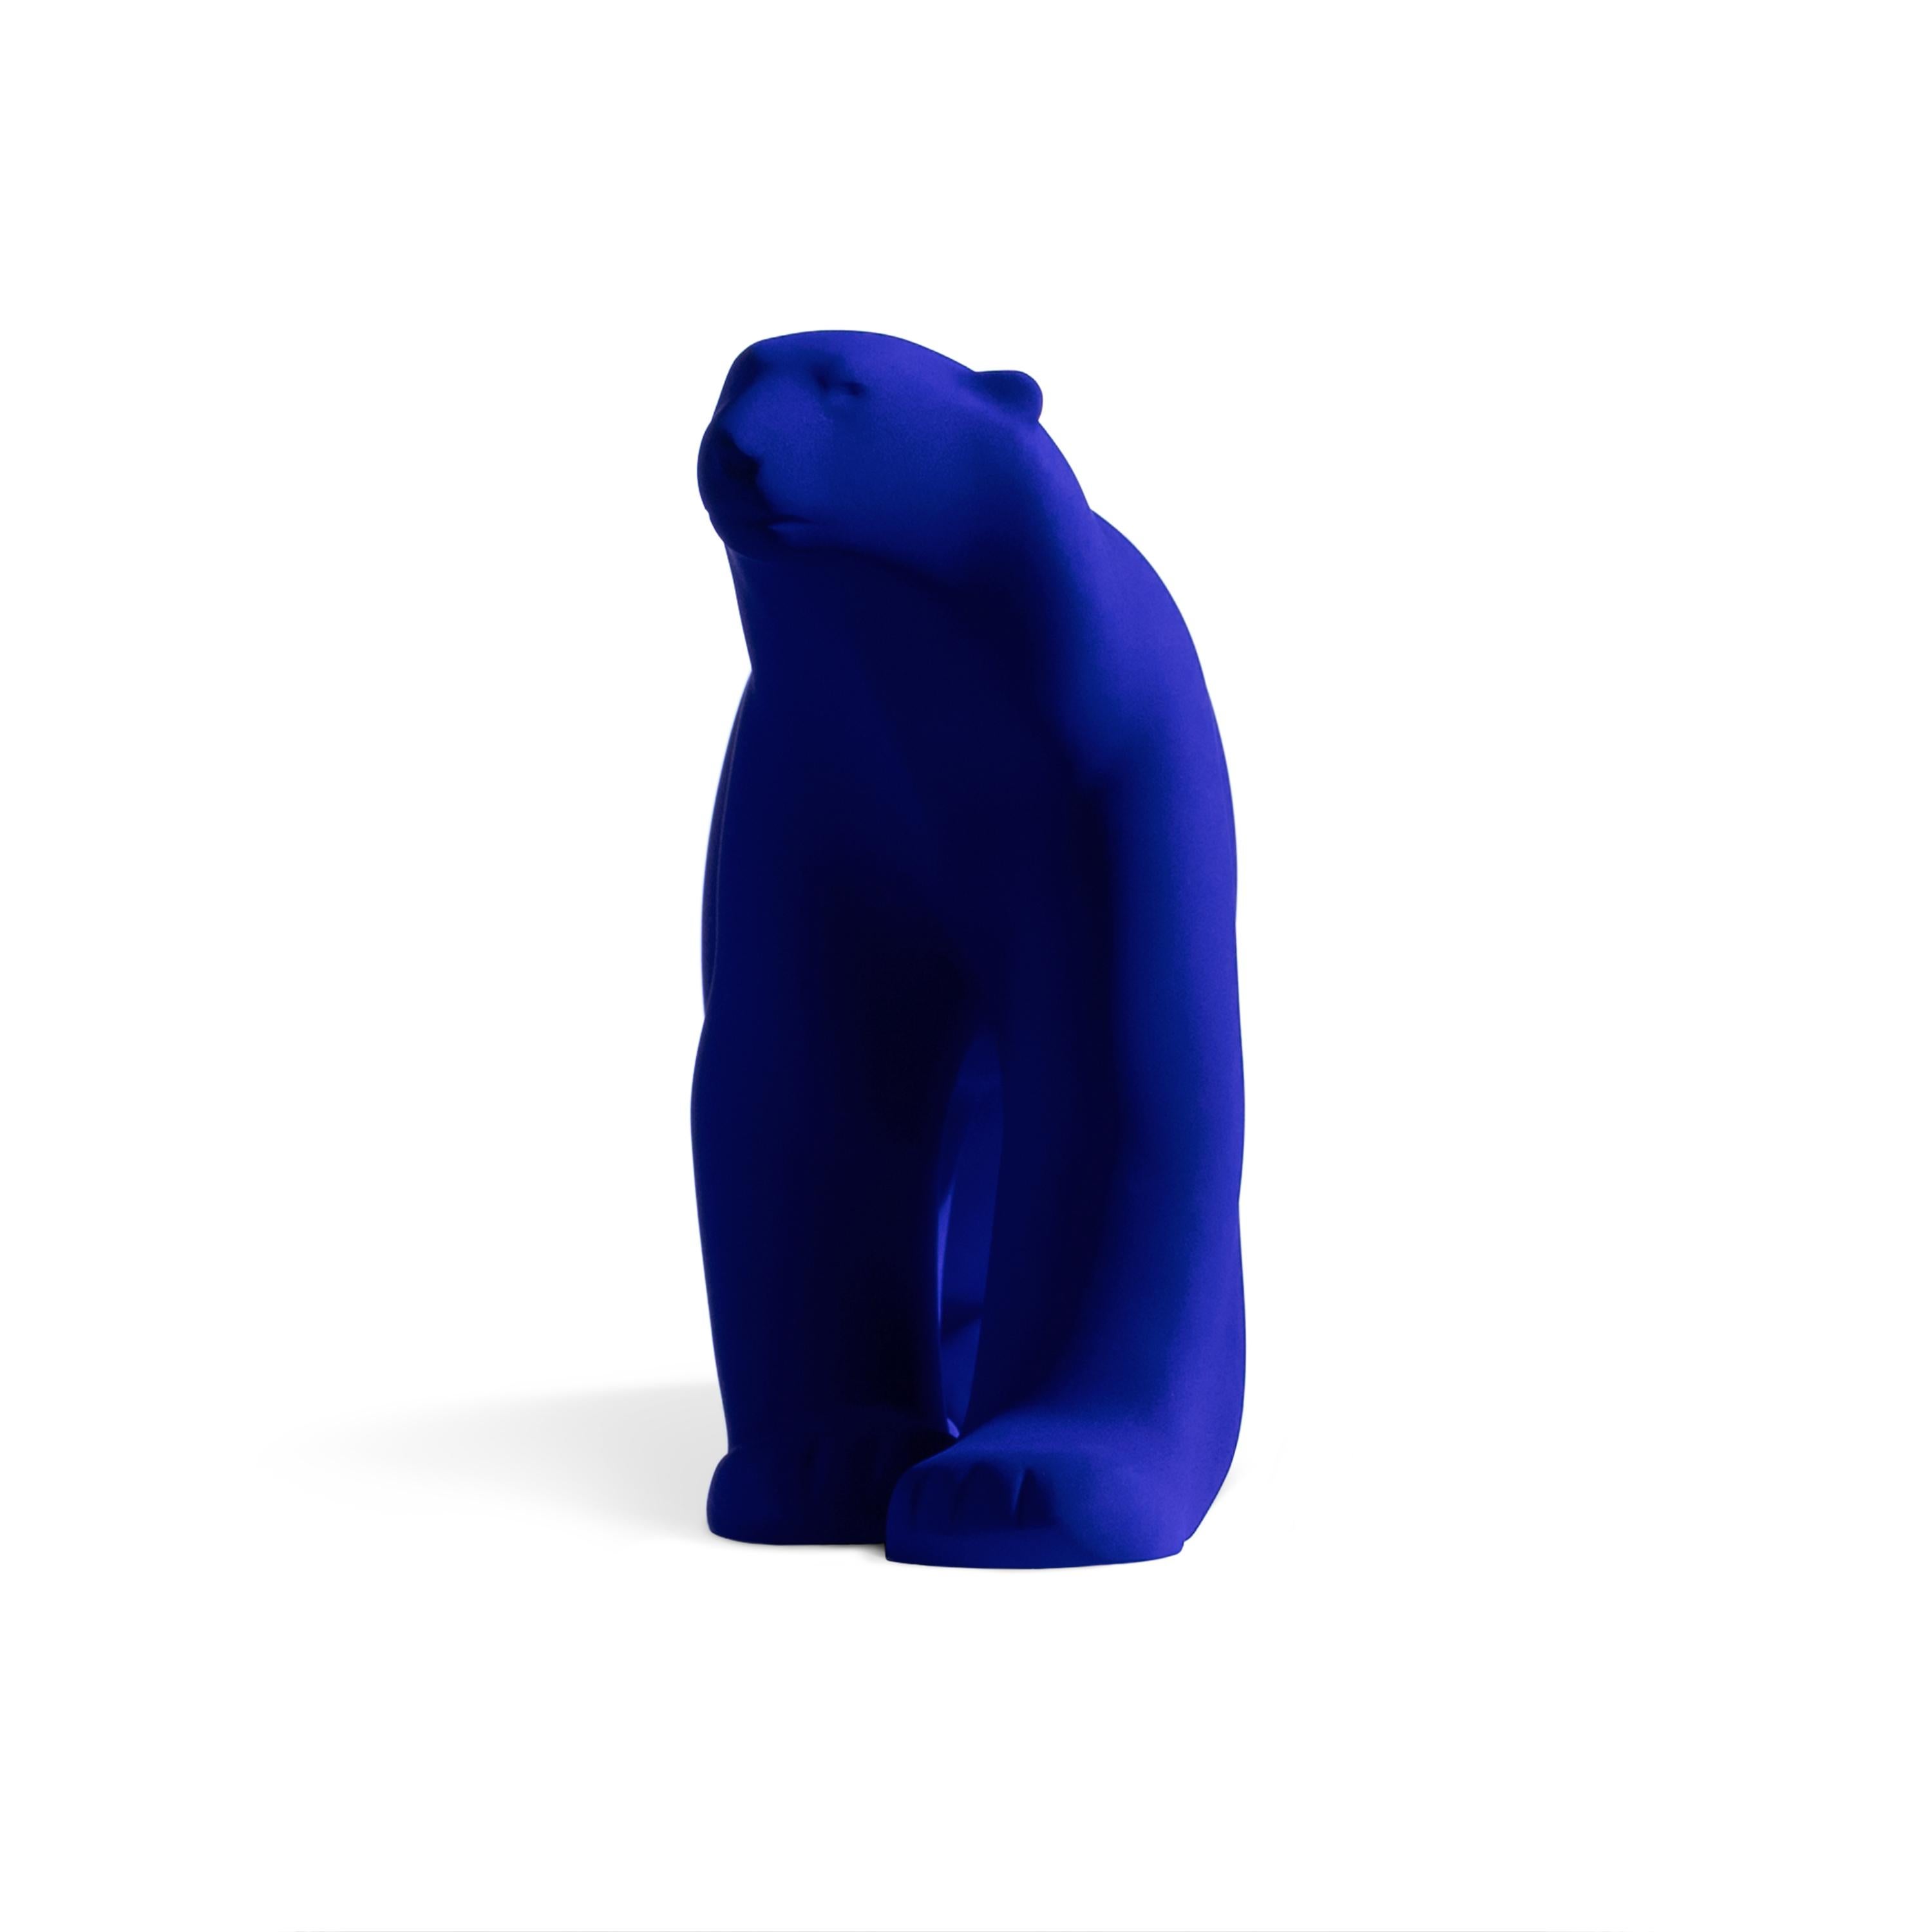 L’OURS POMPON – EDITION YVES KLEIN  - Contemporary Sculpture by Yves Klein